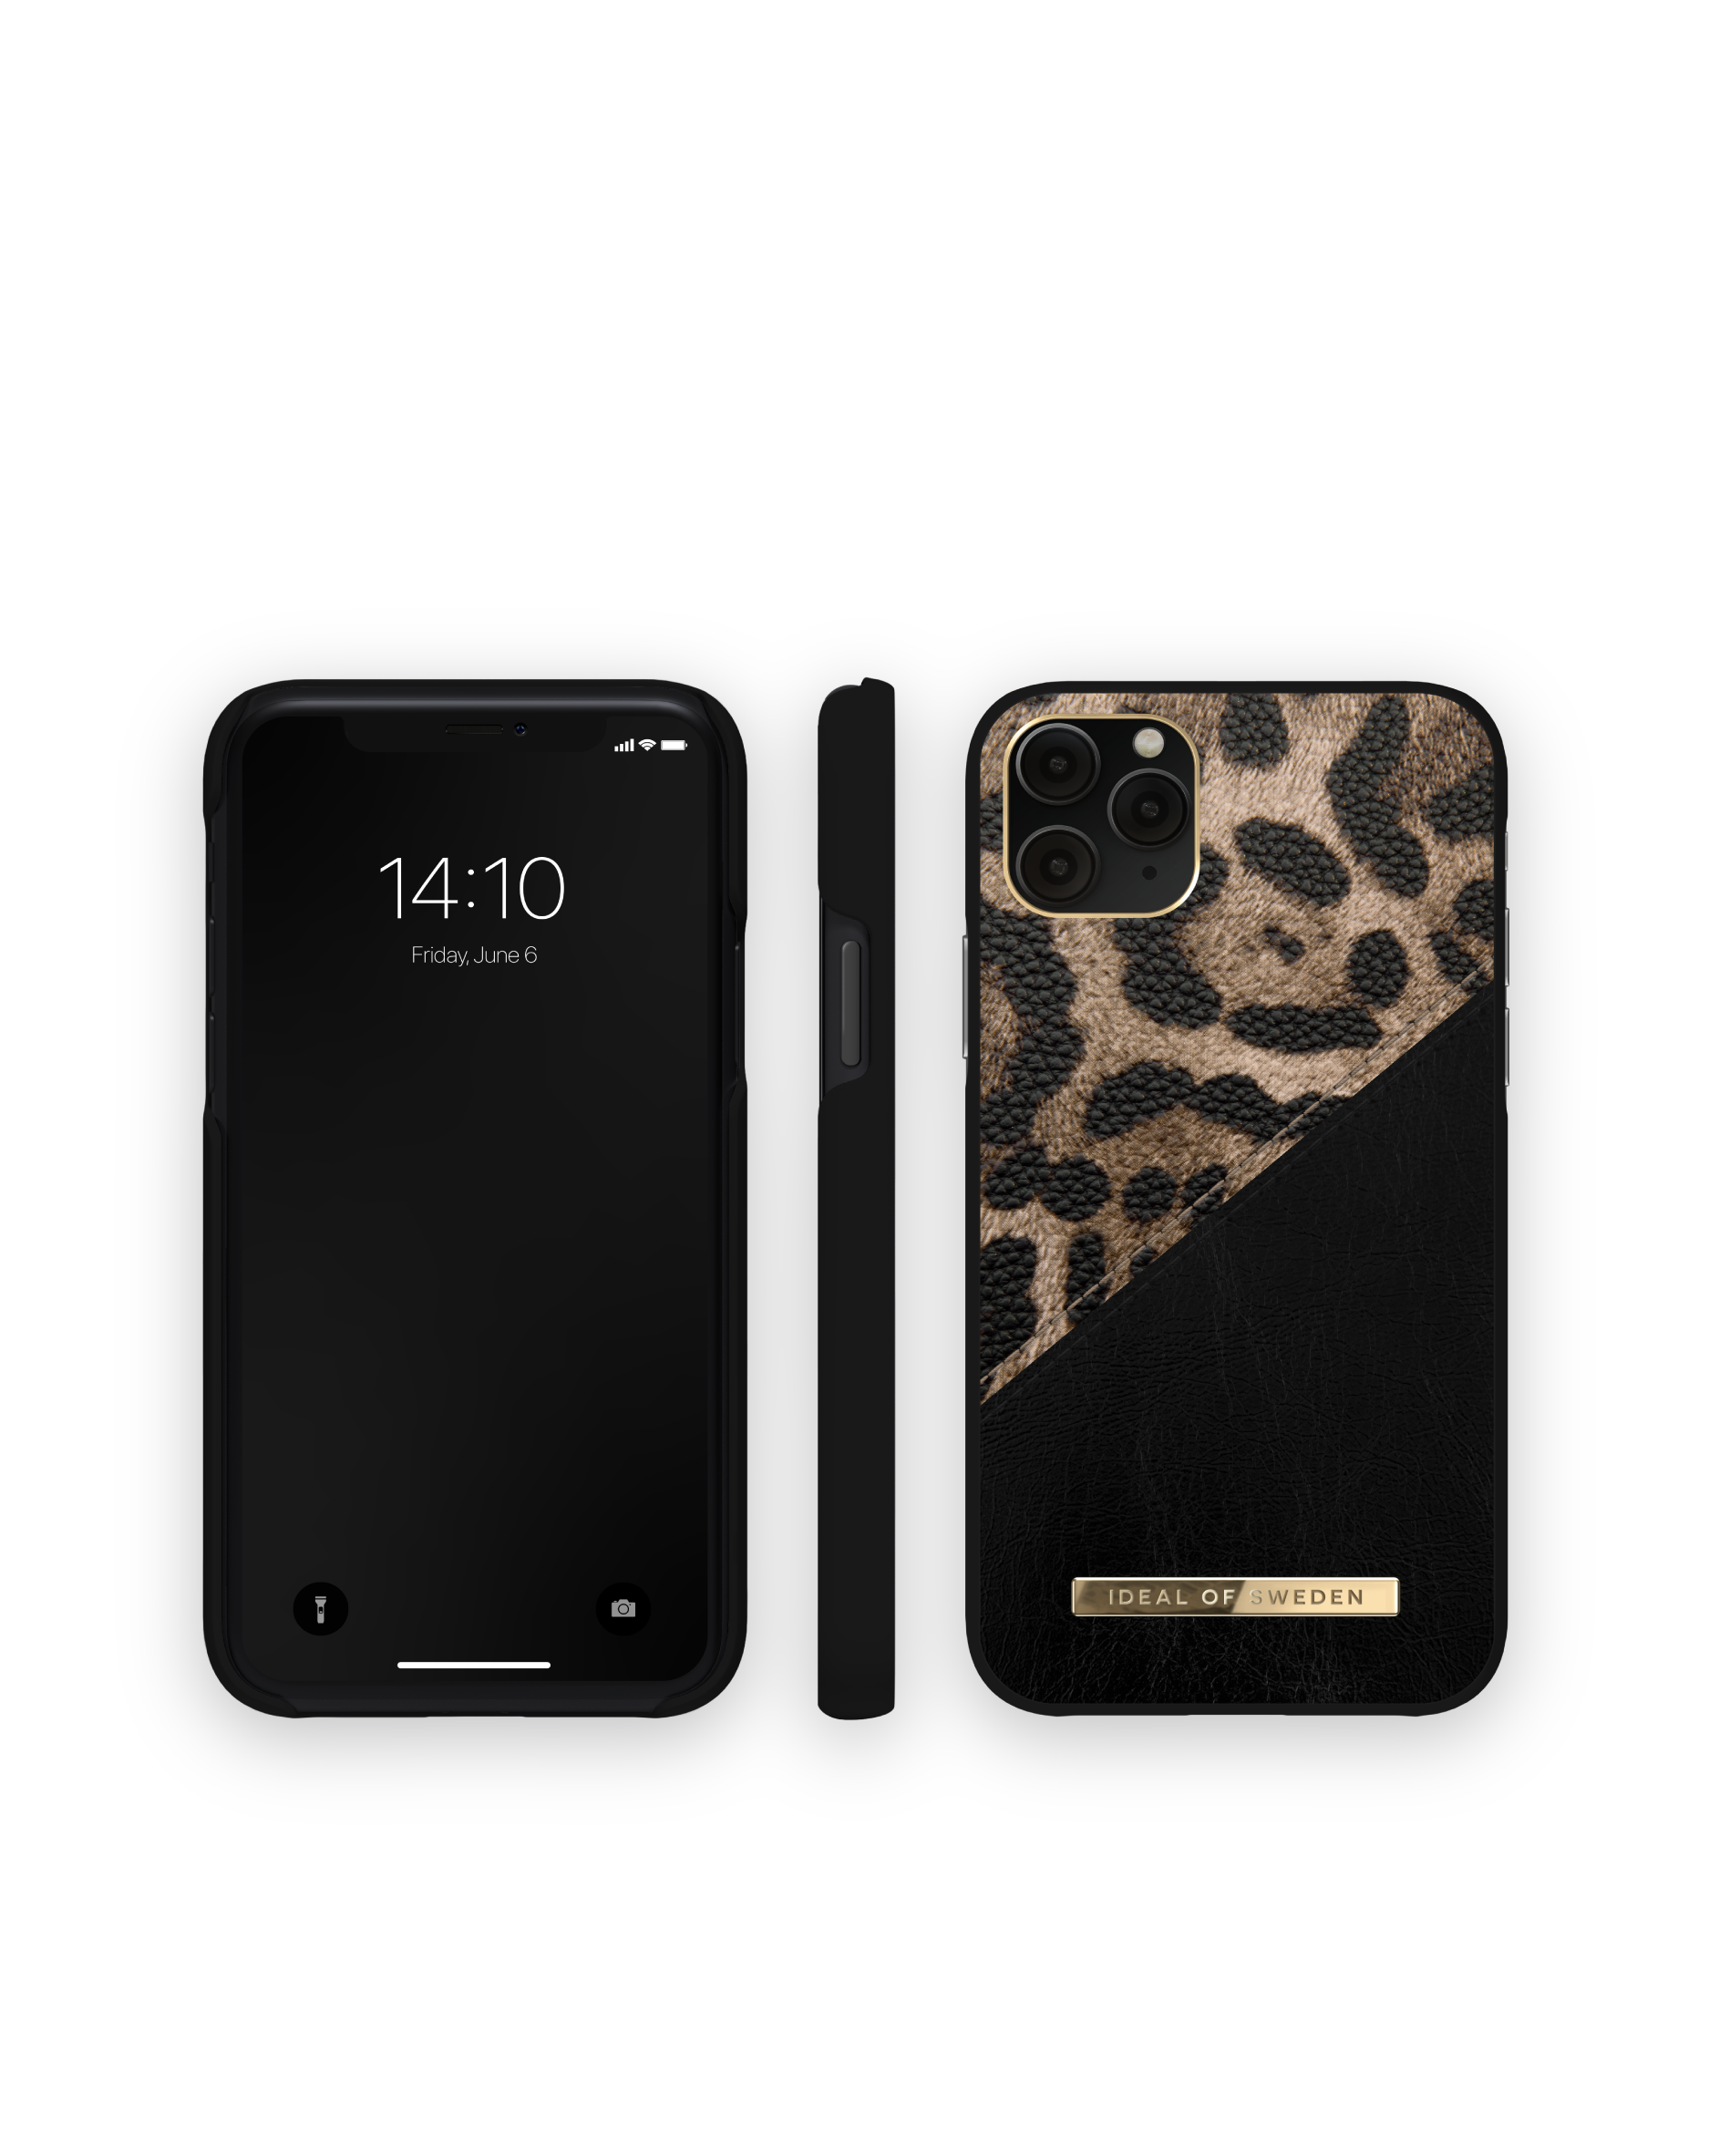 Apple, Pro/XS/X, Midnight 11 iPhone Backcover, SWEDEN Leopard IDEAL OF IDACAW21-I1958-330,